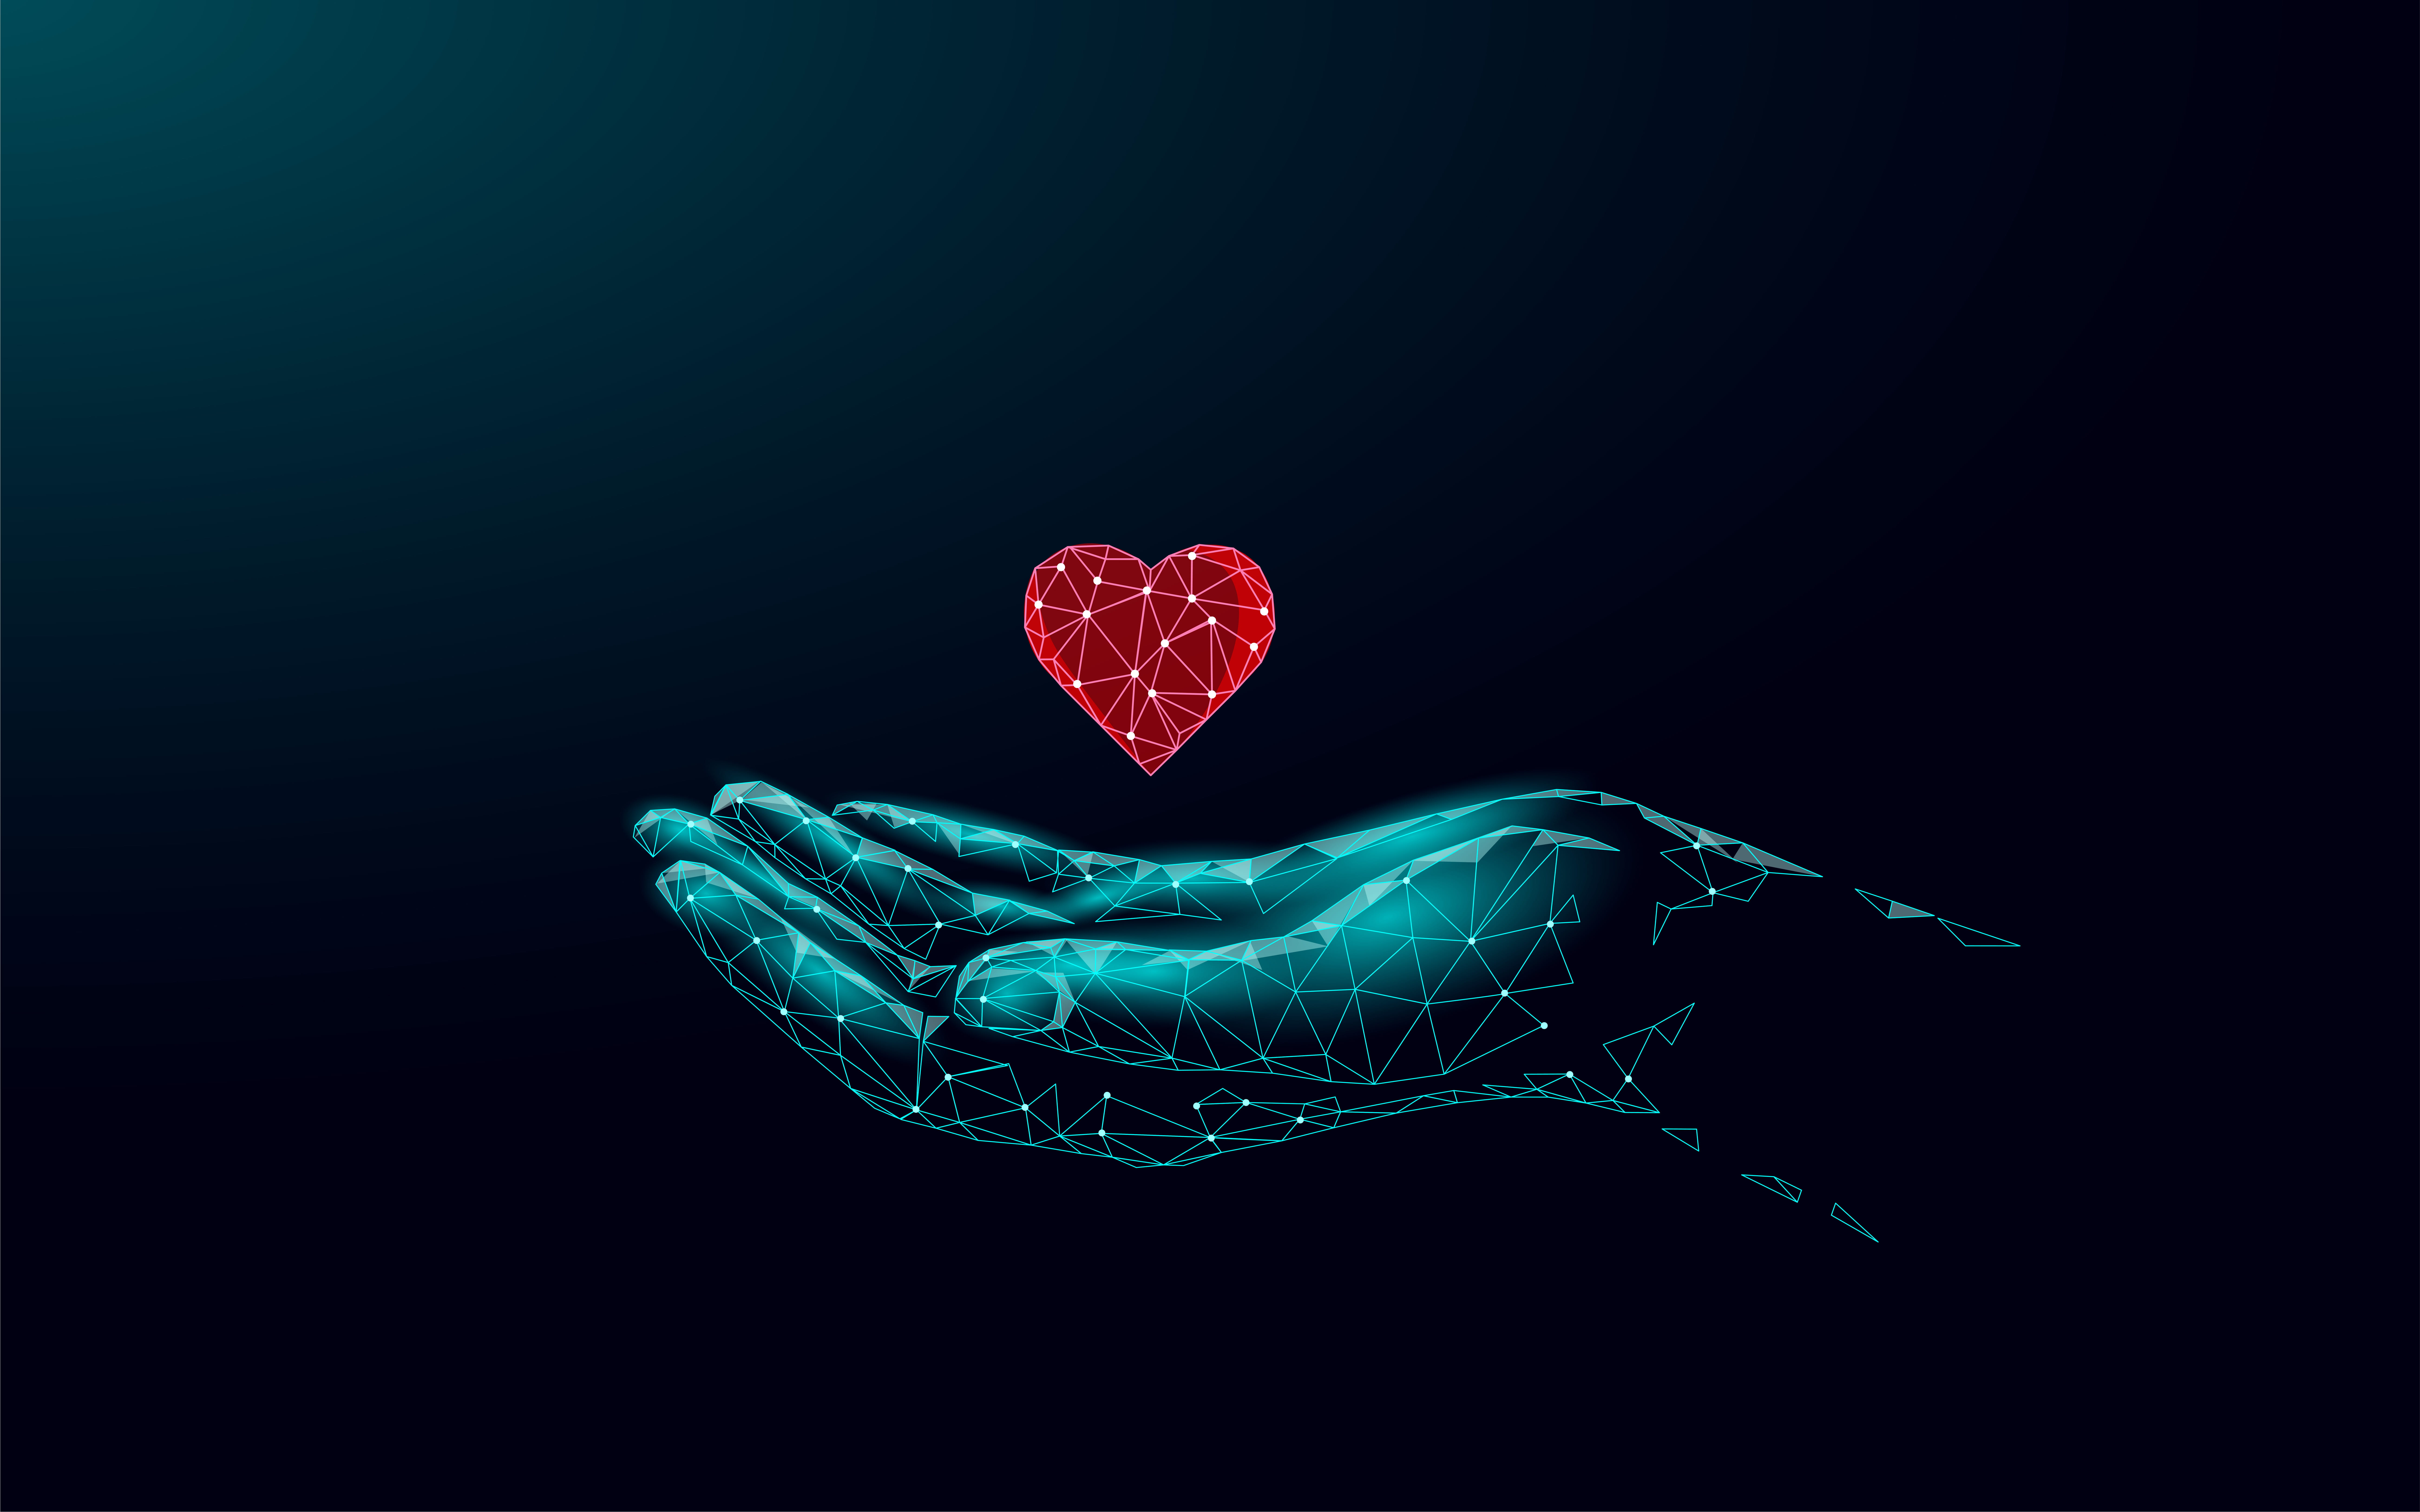 A graphic design image of a hand holding a floating heart.